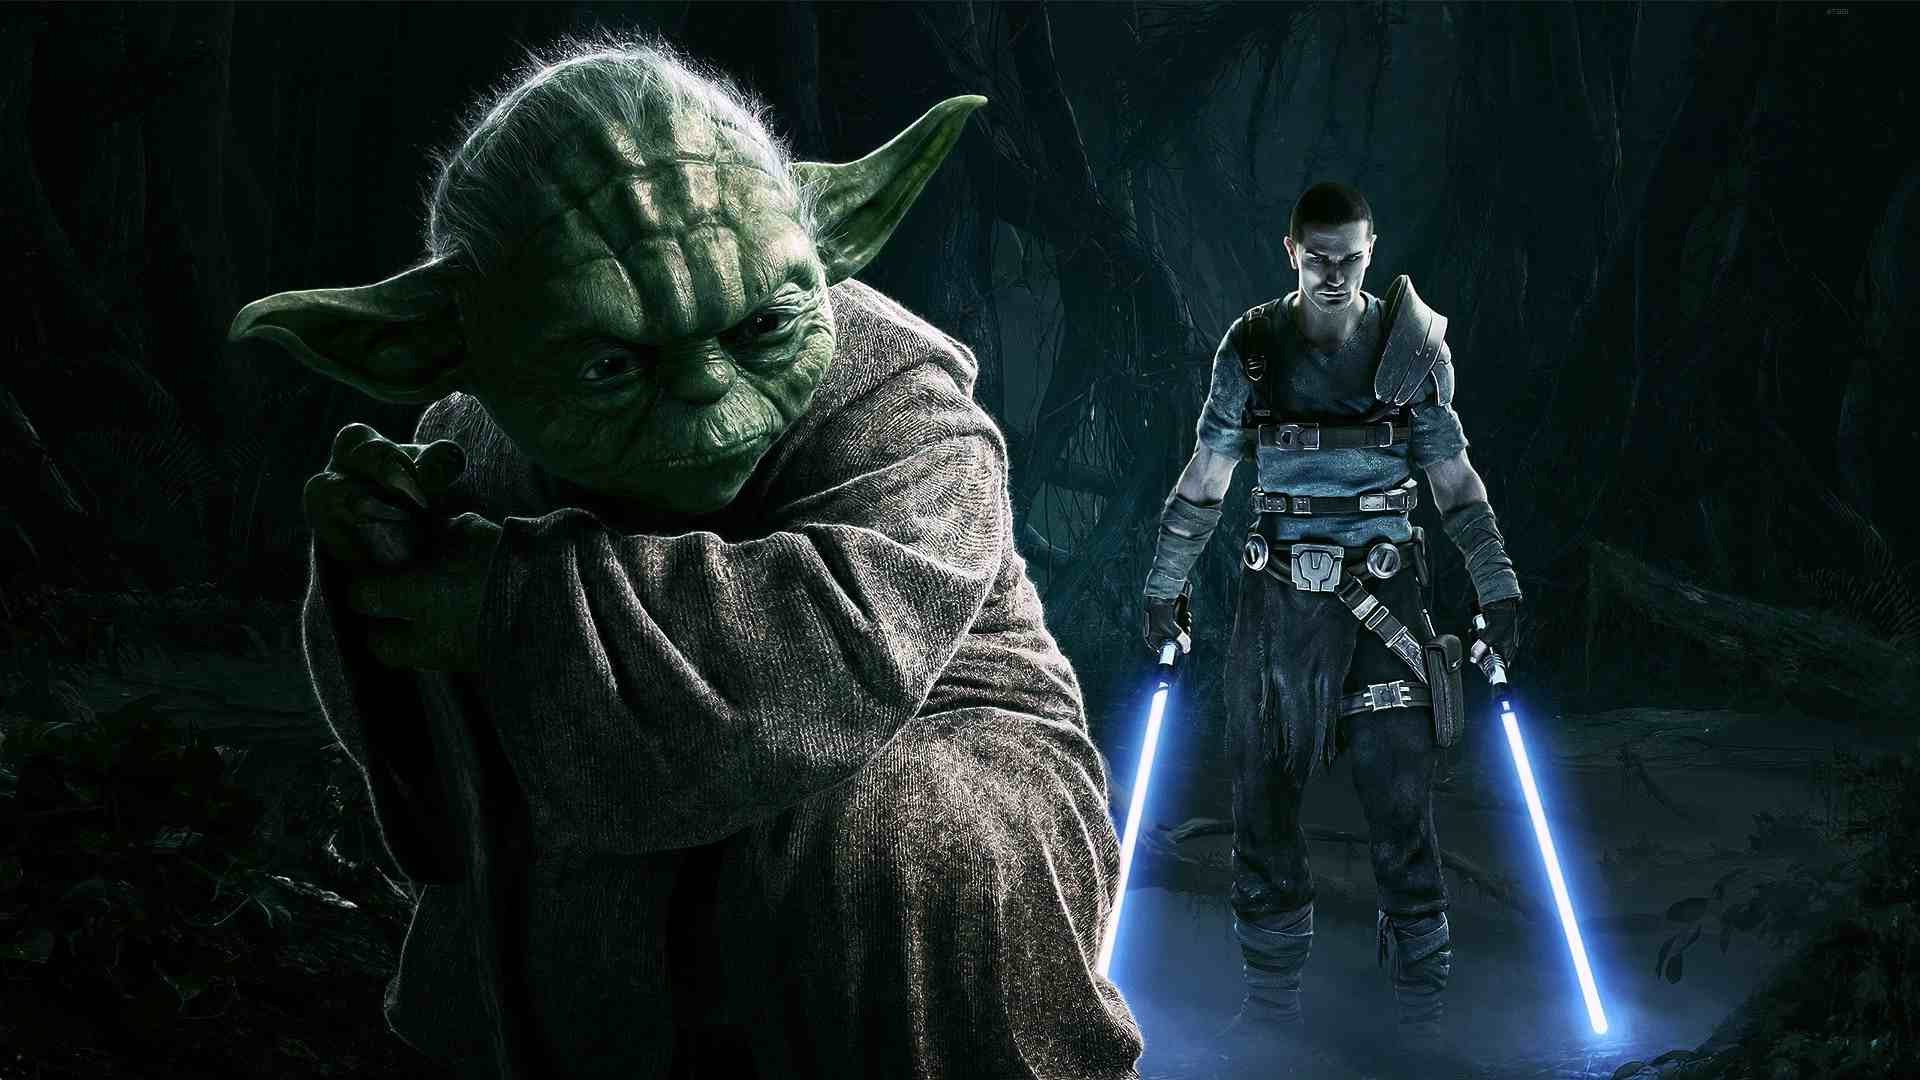 1920x1080 Wallpaper : Yoda, midnight, Star Wars The Force Unleashed, starkiller, darkness, px, computer wallpaper, fictional character, special effects, phenomenon, visual effects goodfon 787359 HD Wallpapers